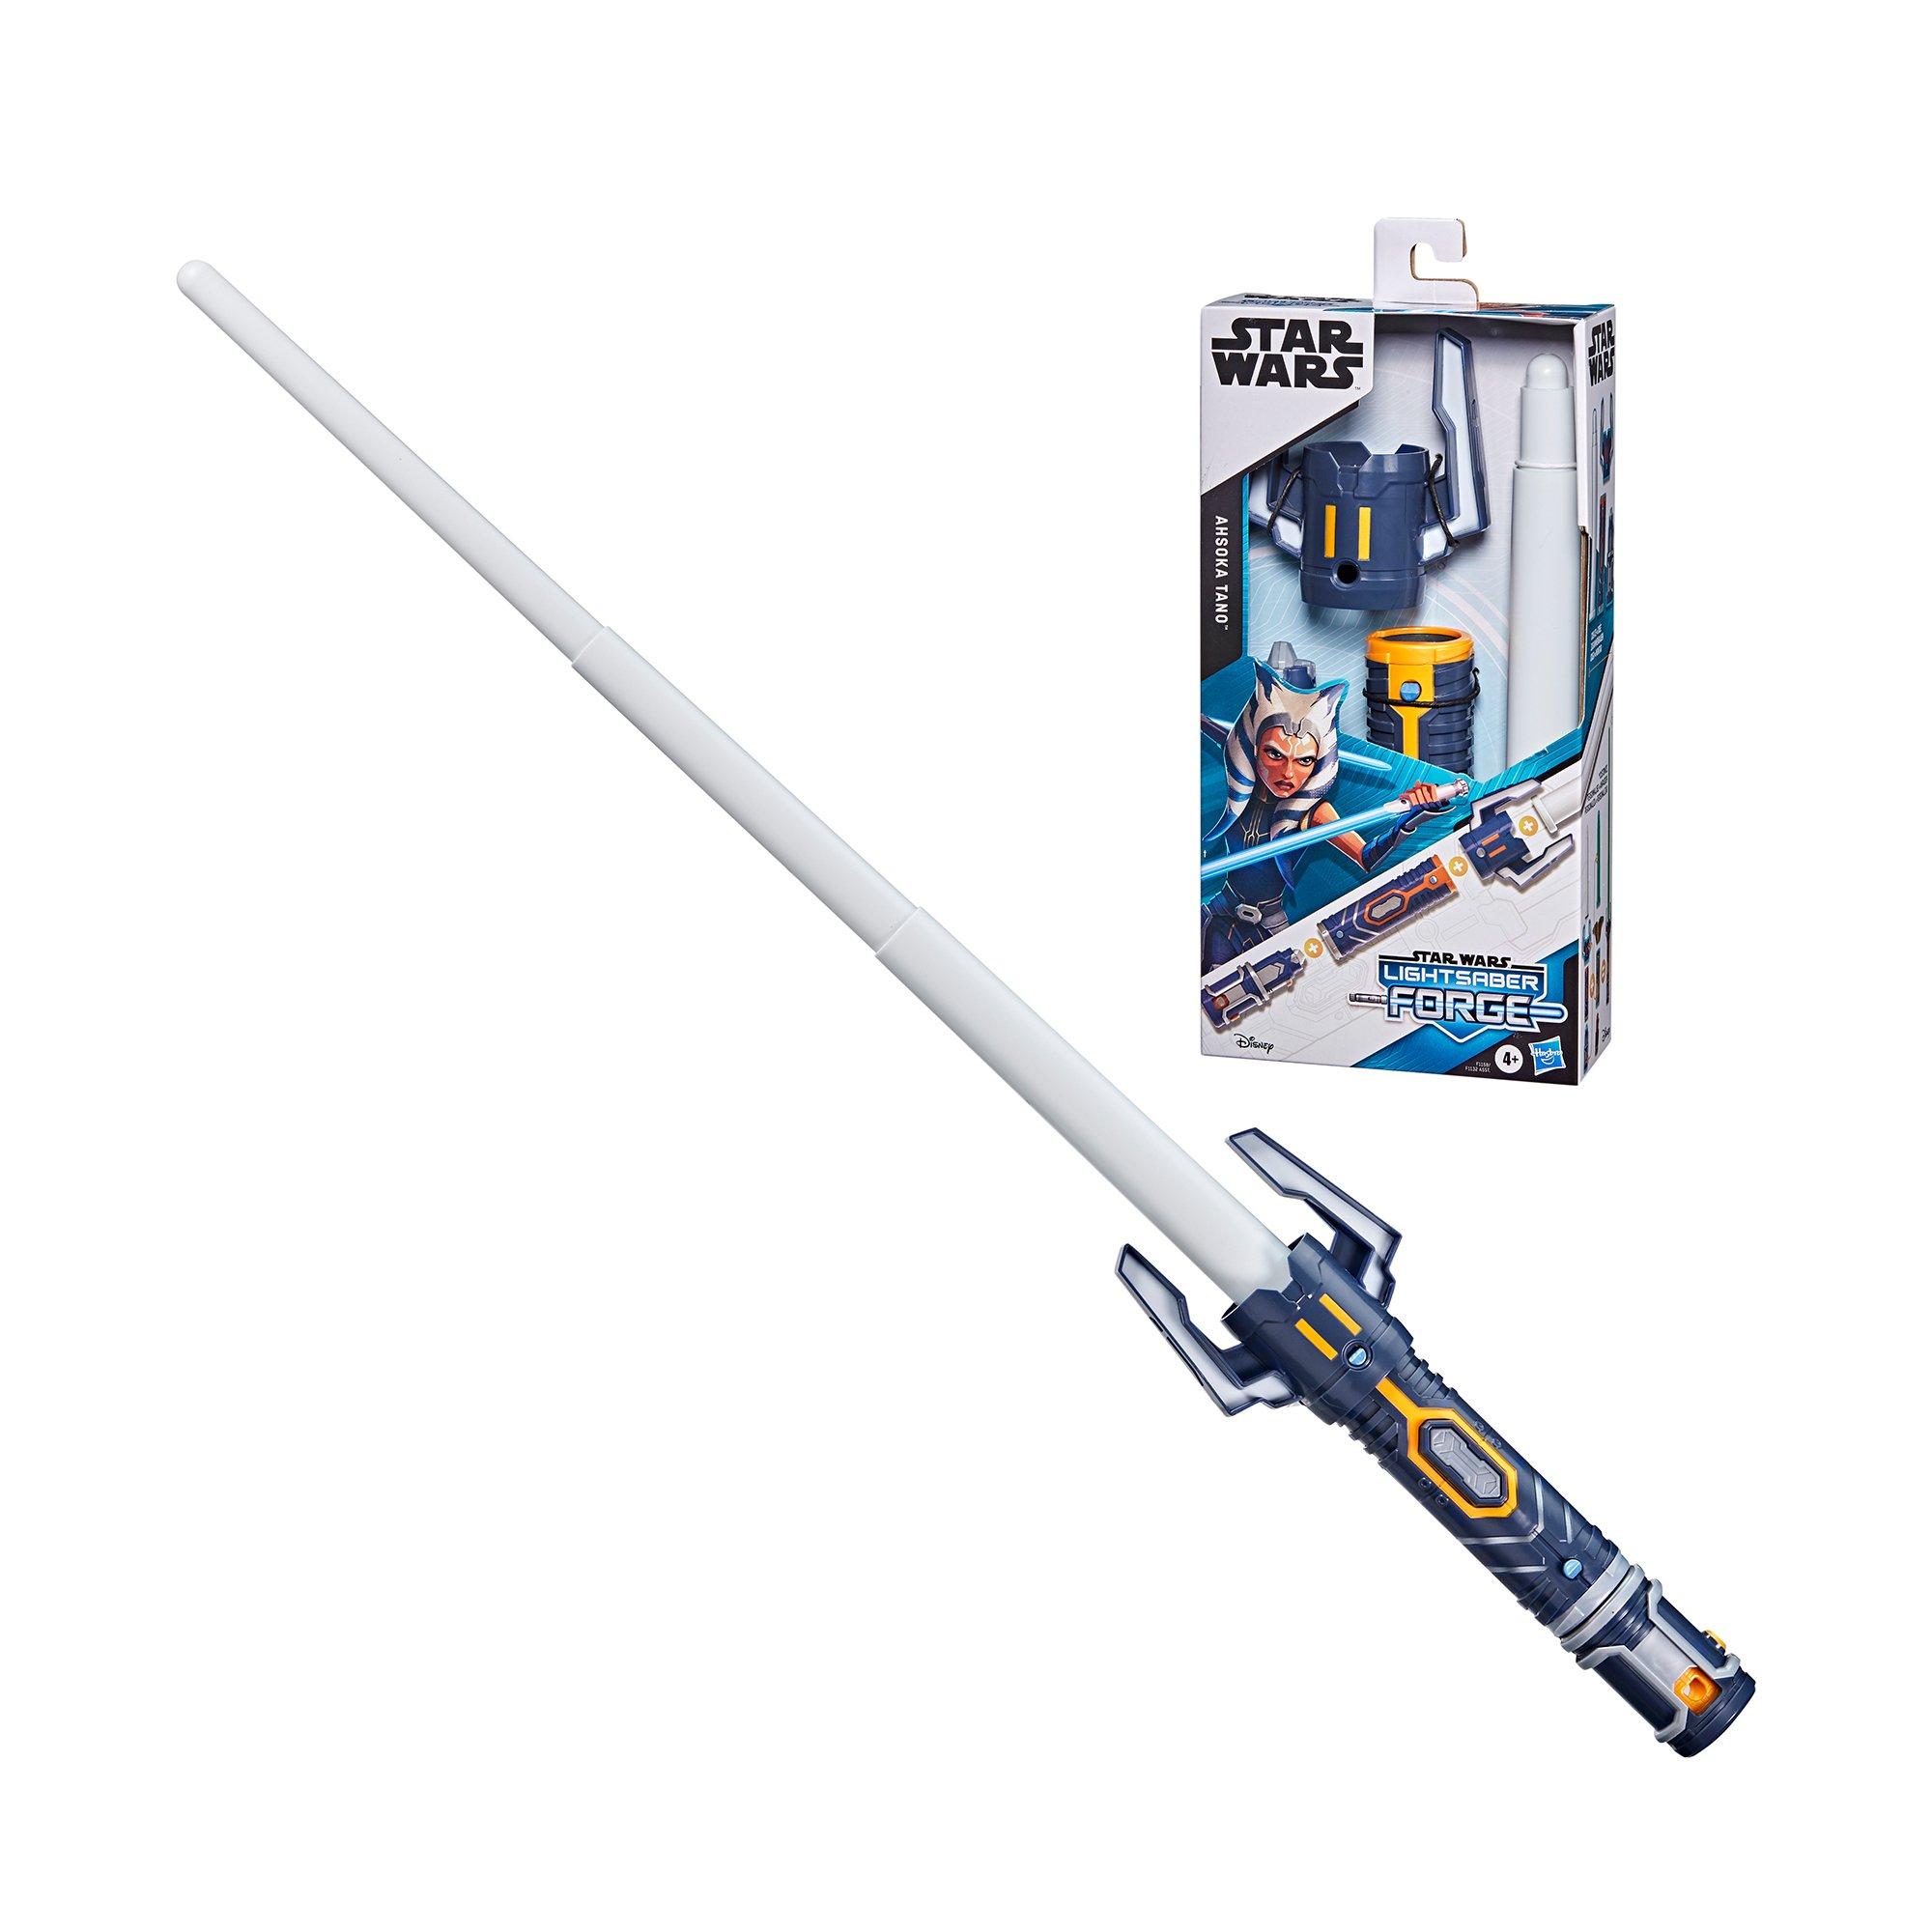 Image of Hasbro Lightsaber Forge Extendable Lightsaber, Zufallsauswahl